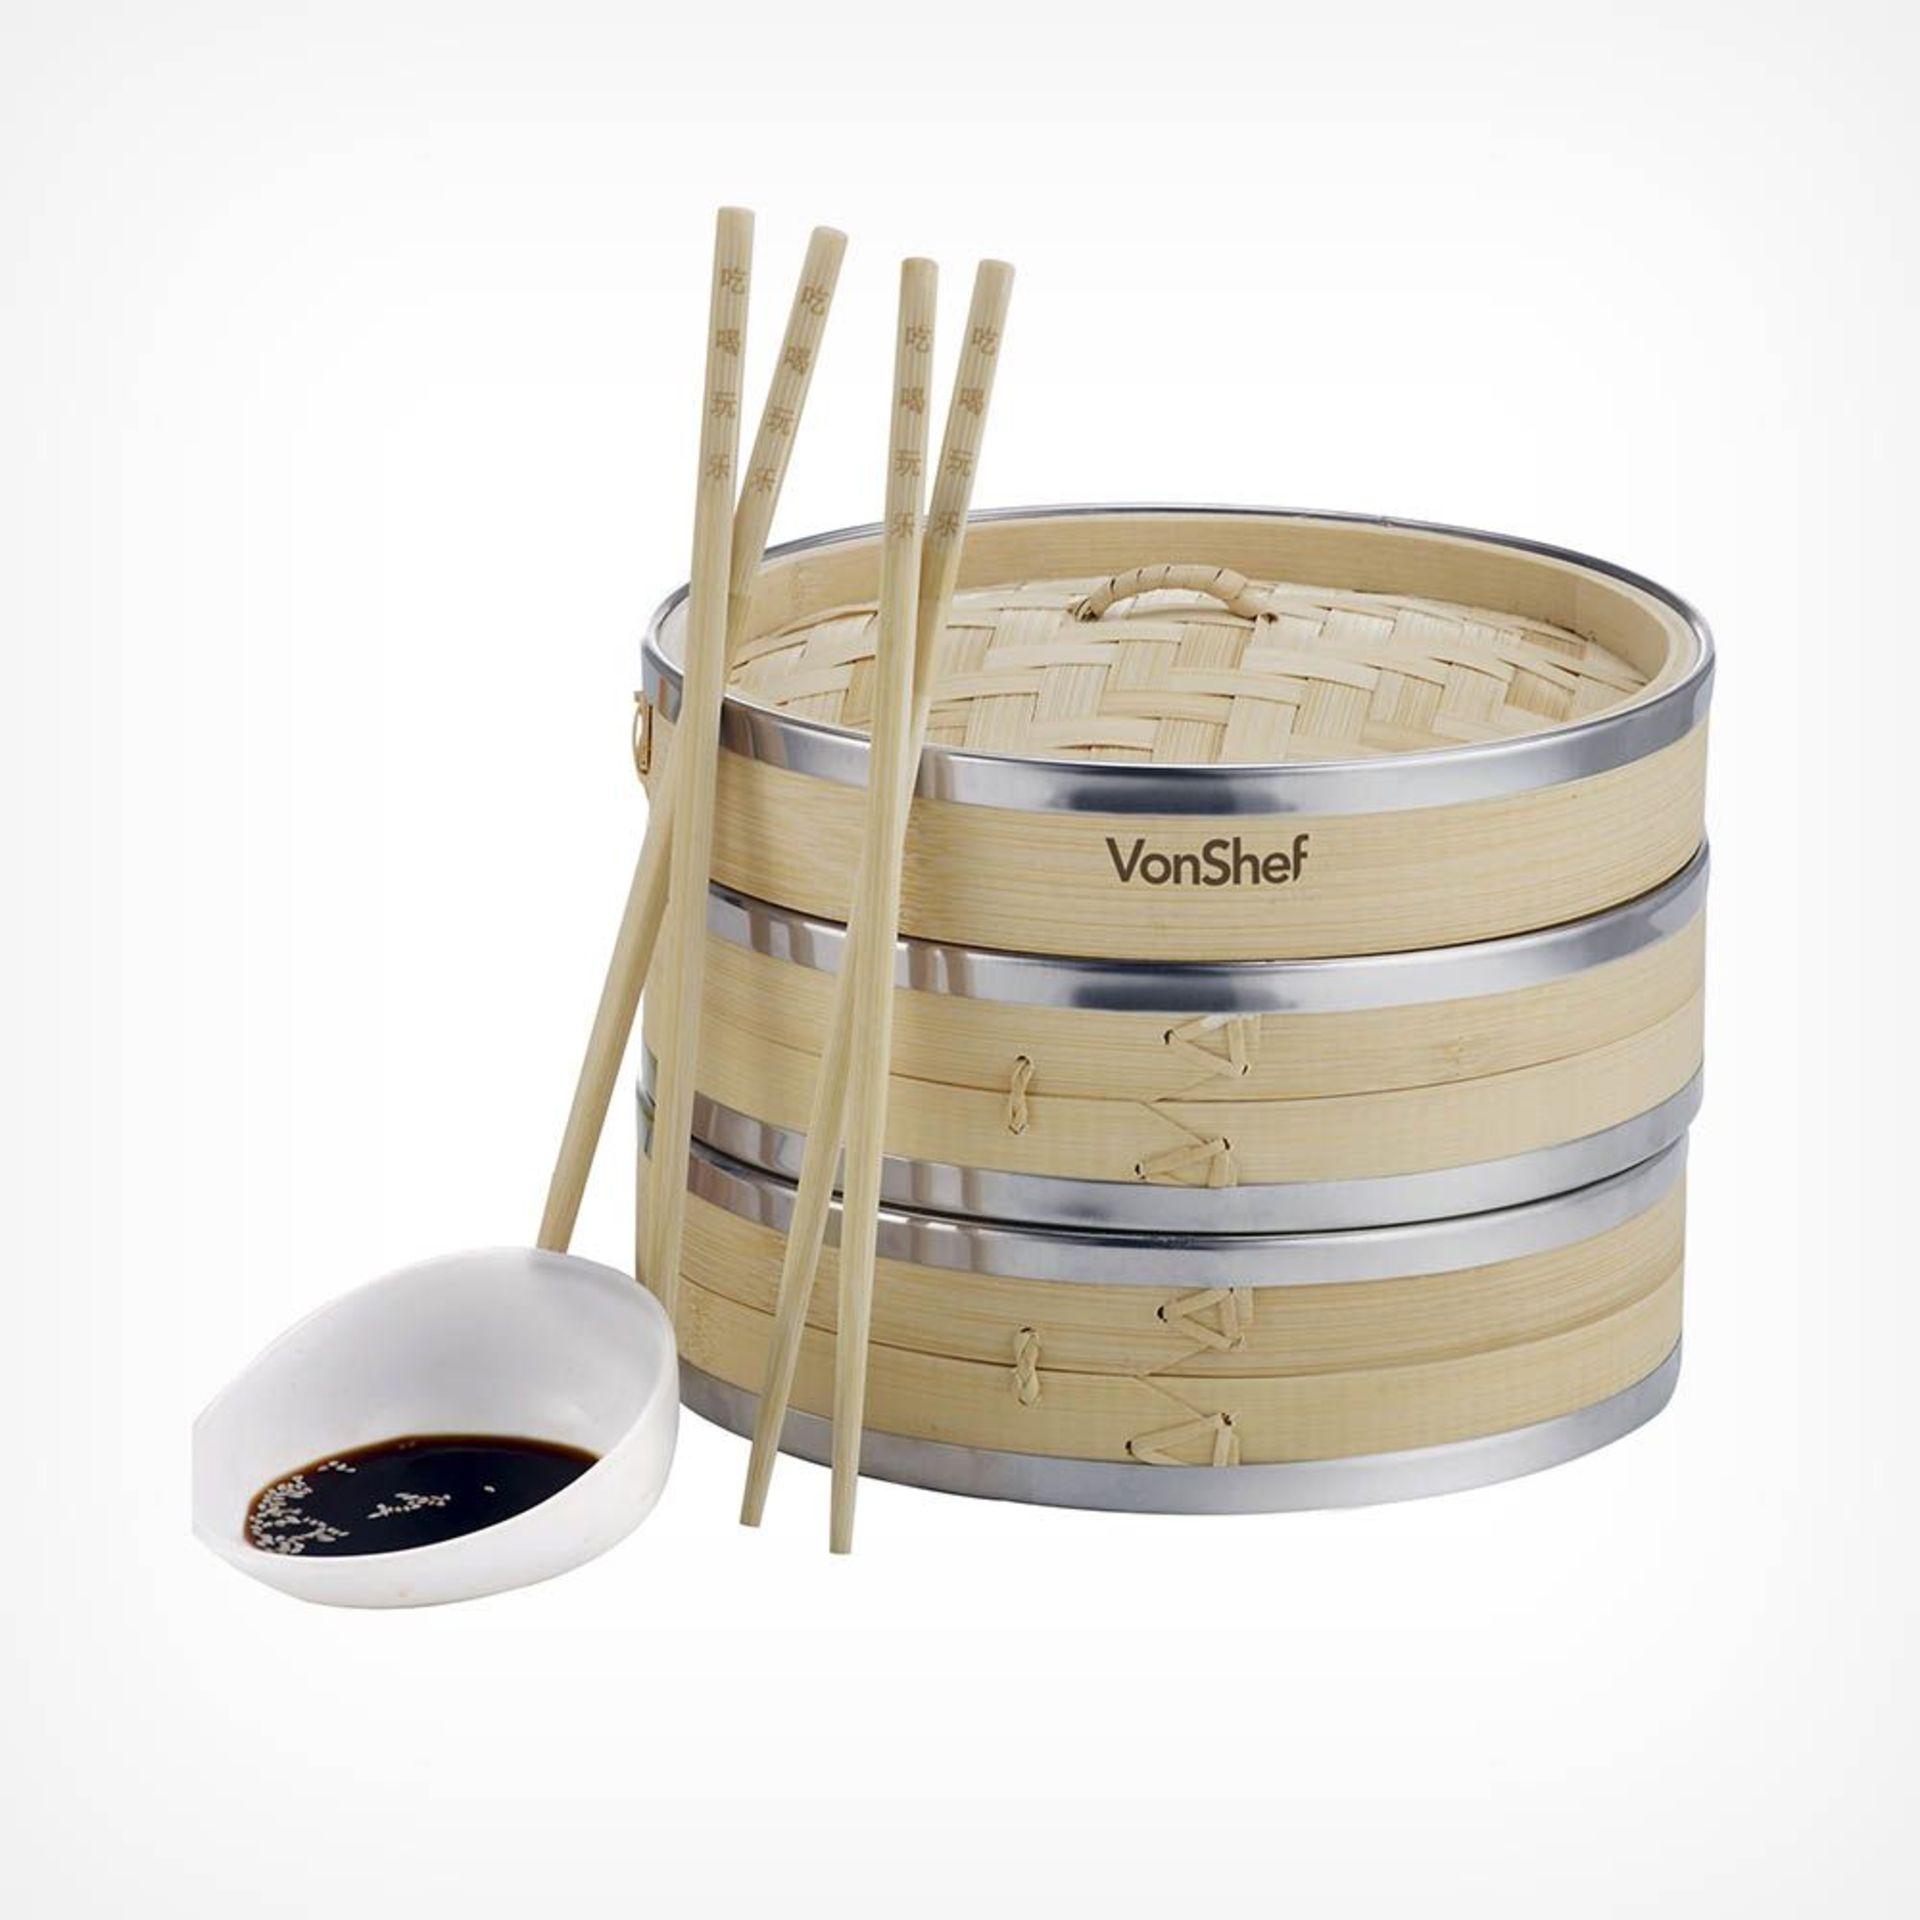 2 Tier Bamboo Steamer. - S2. Made out of tradition natural bamboo wood, the steamer is sturdy and